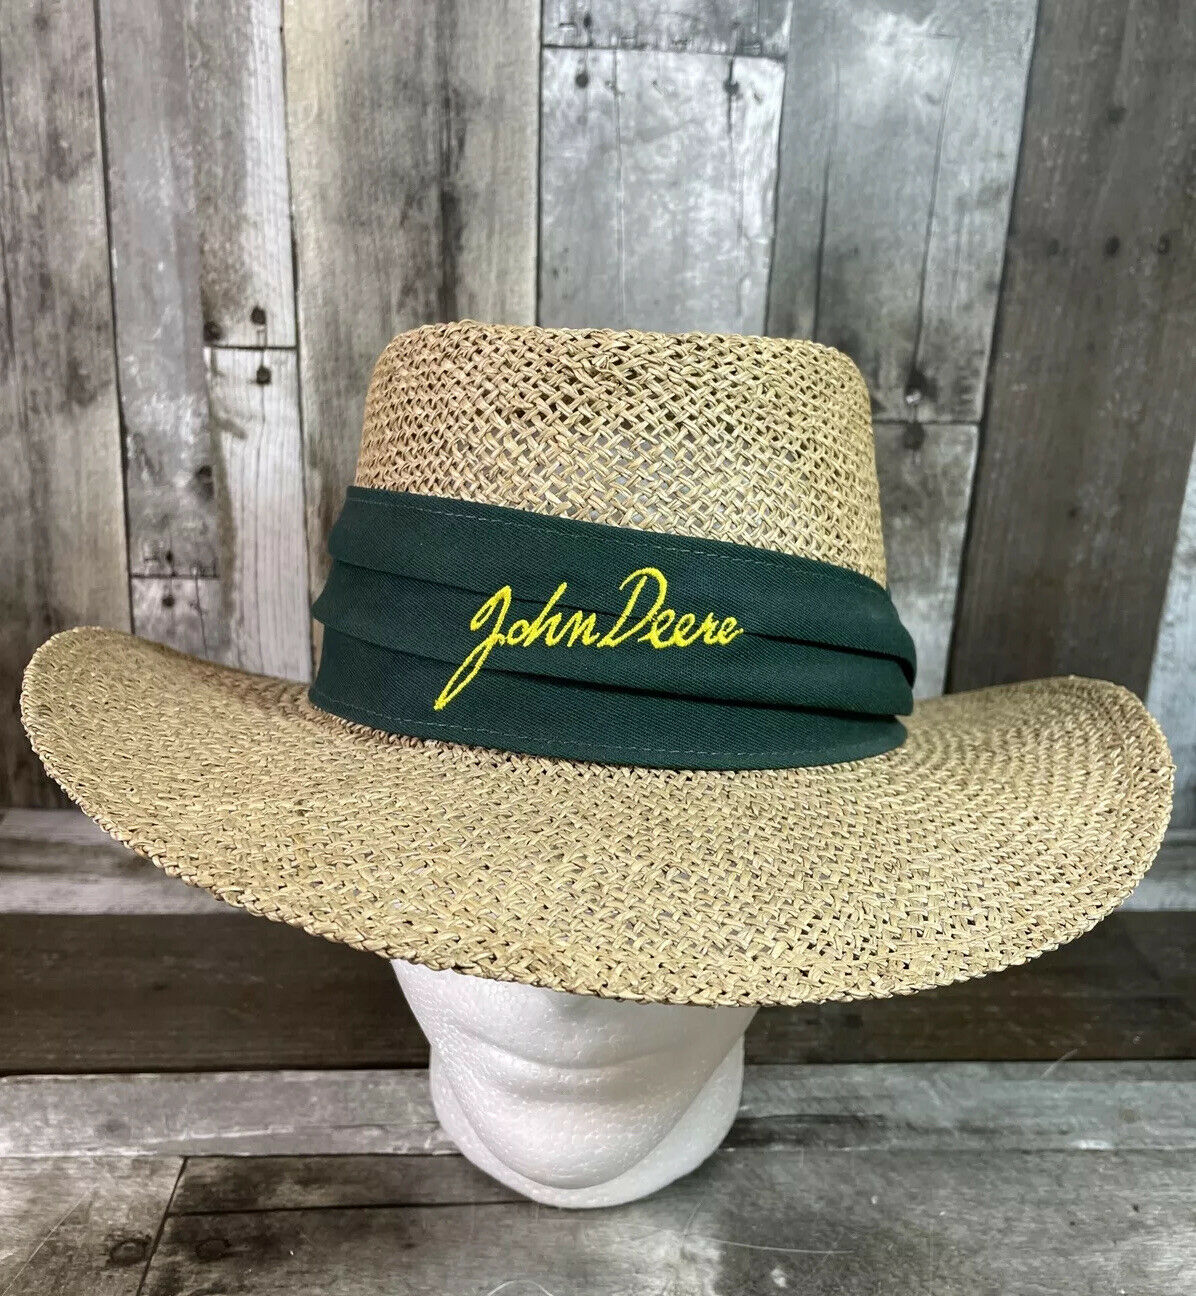 Vintage John Deere Woven Straw Hat Made In The U.s.a Embroidered Logo Green Band